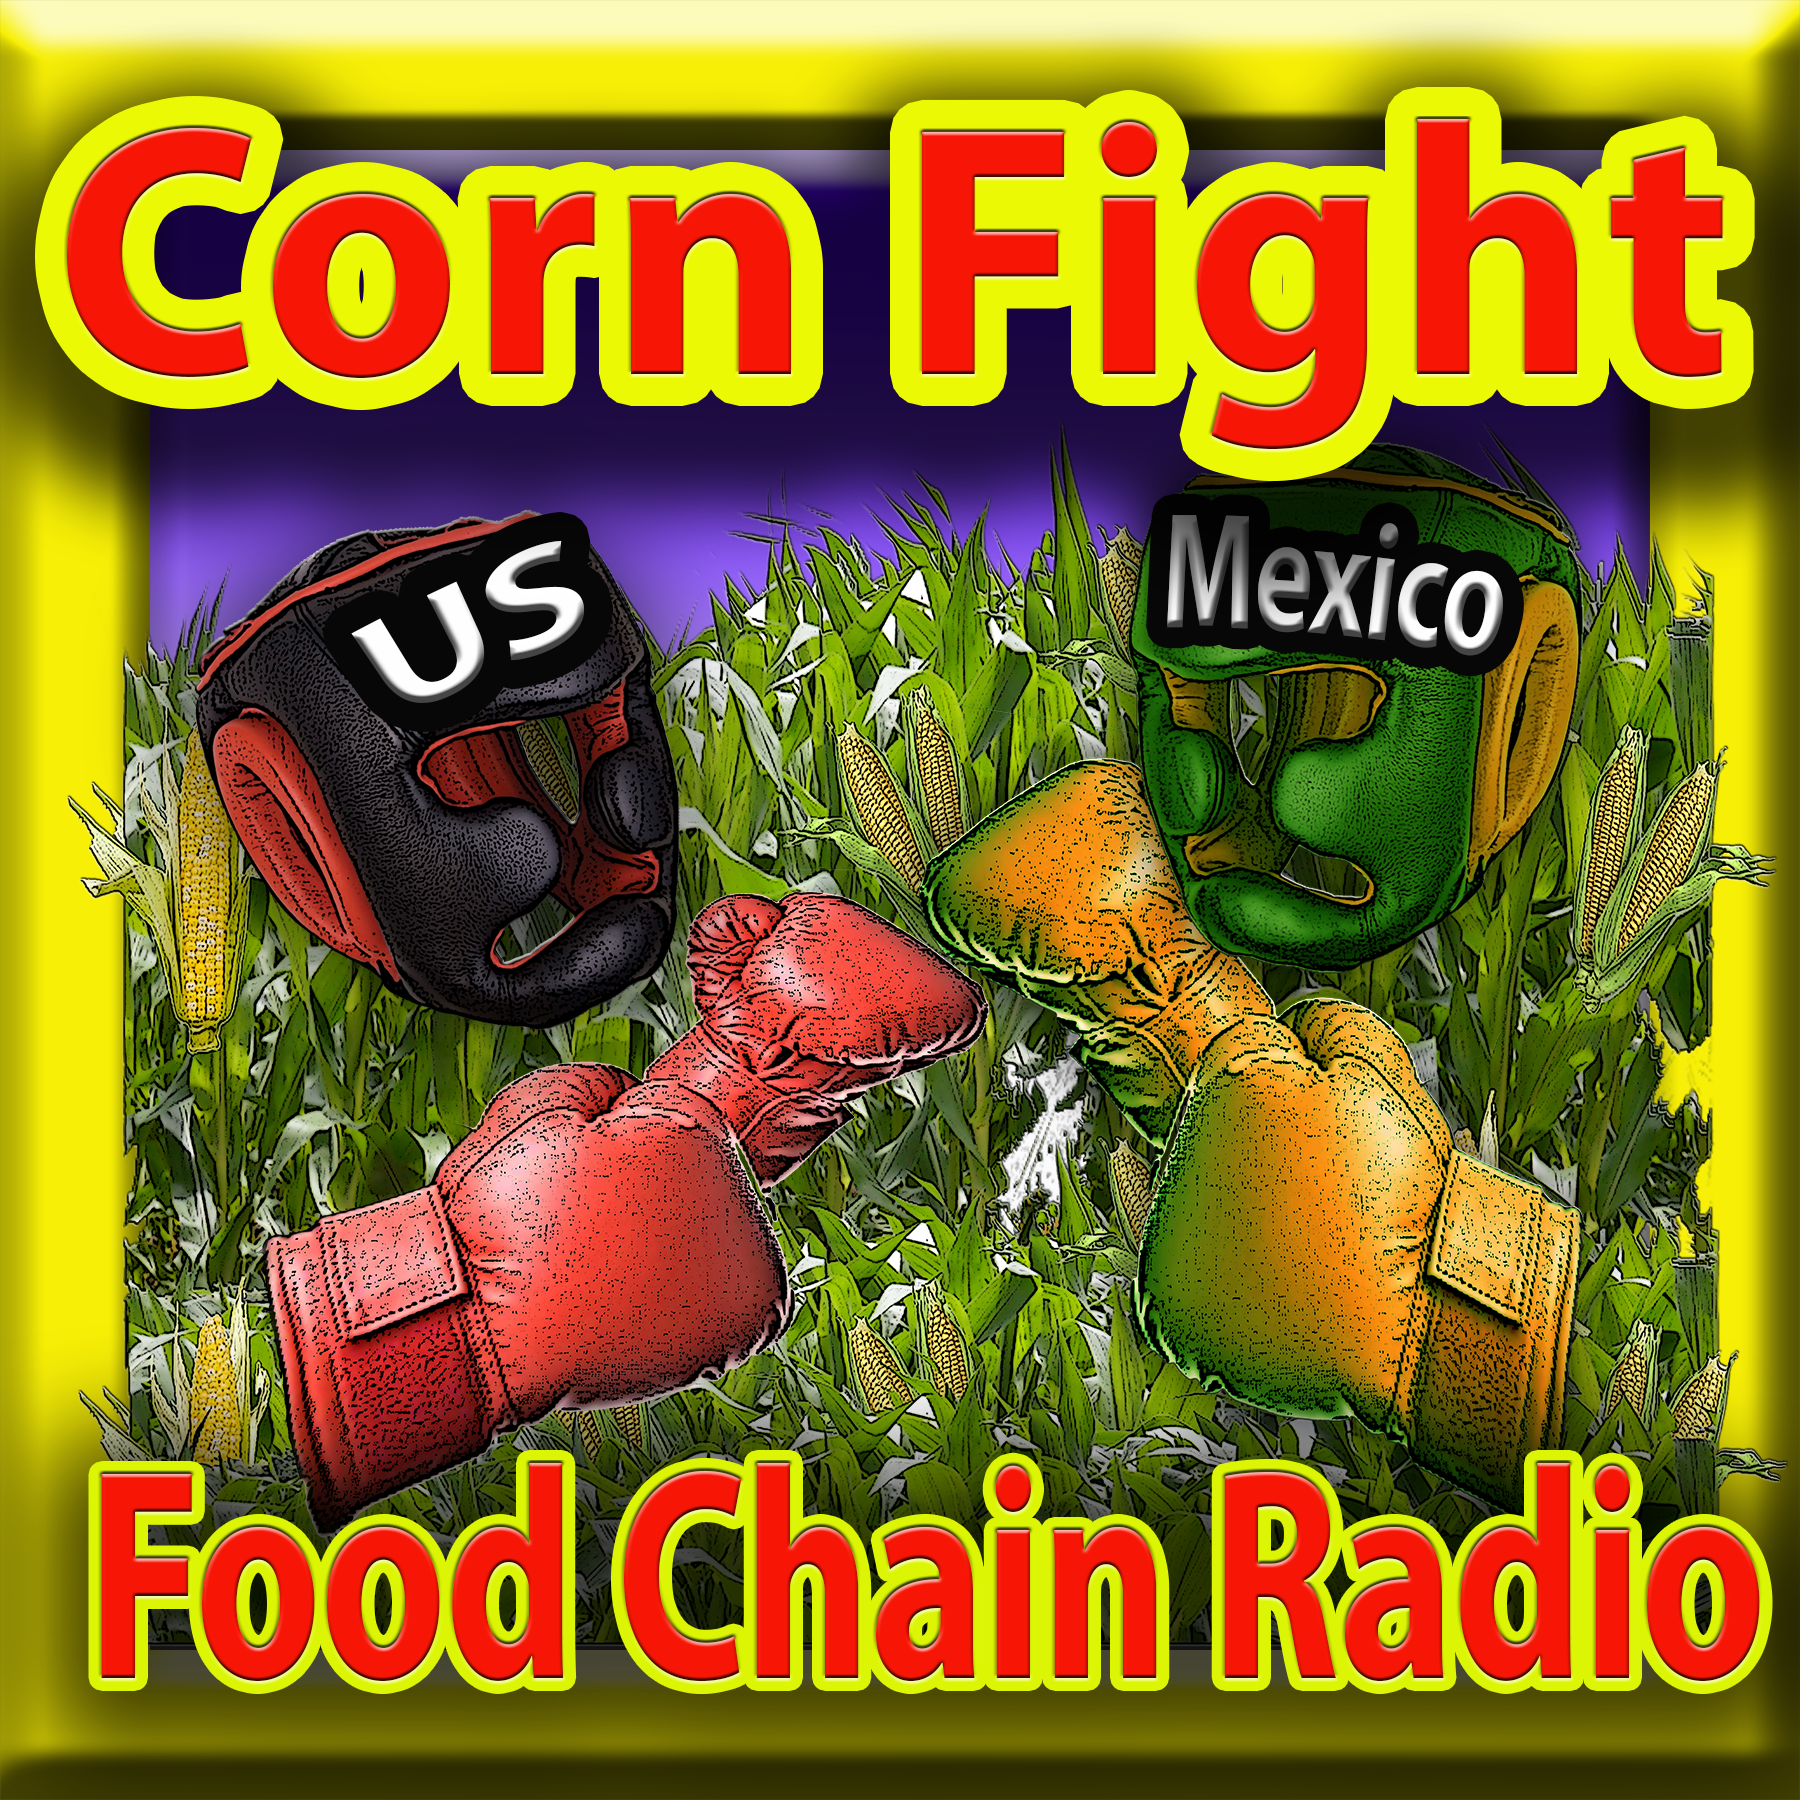 Michael Olson Food Chain Radio - Why did Mexico stand-down from its GMO glyphosate maize stand-off?